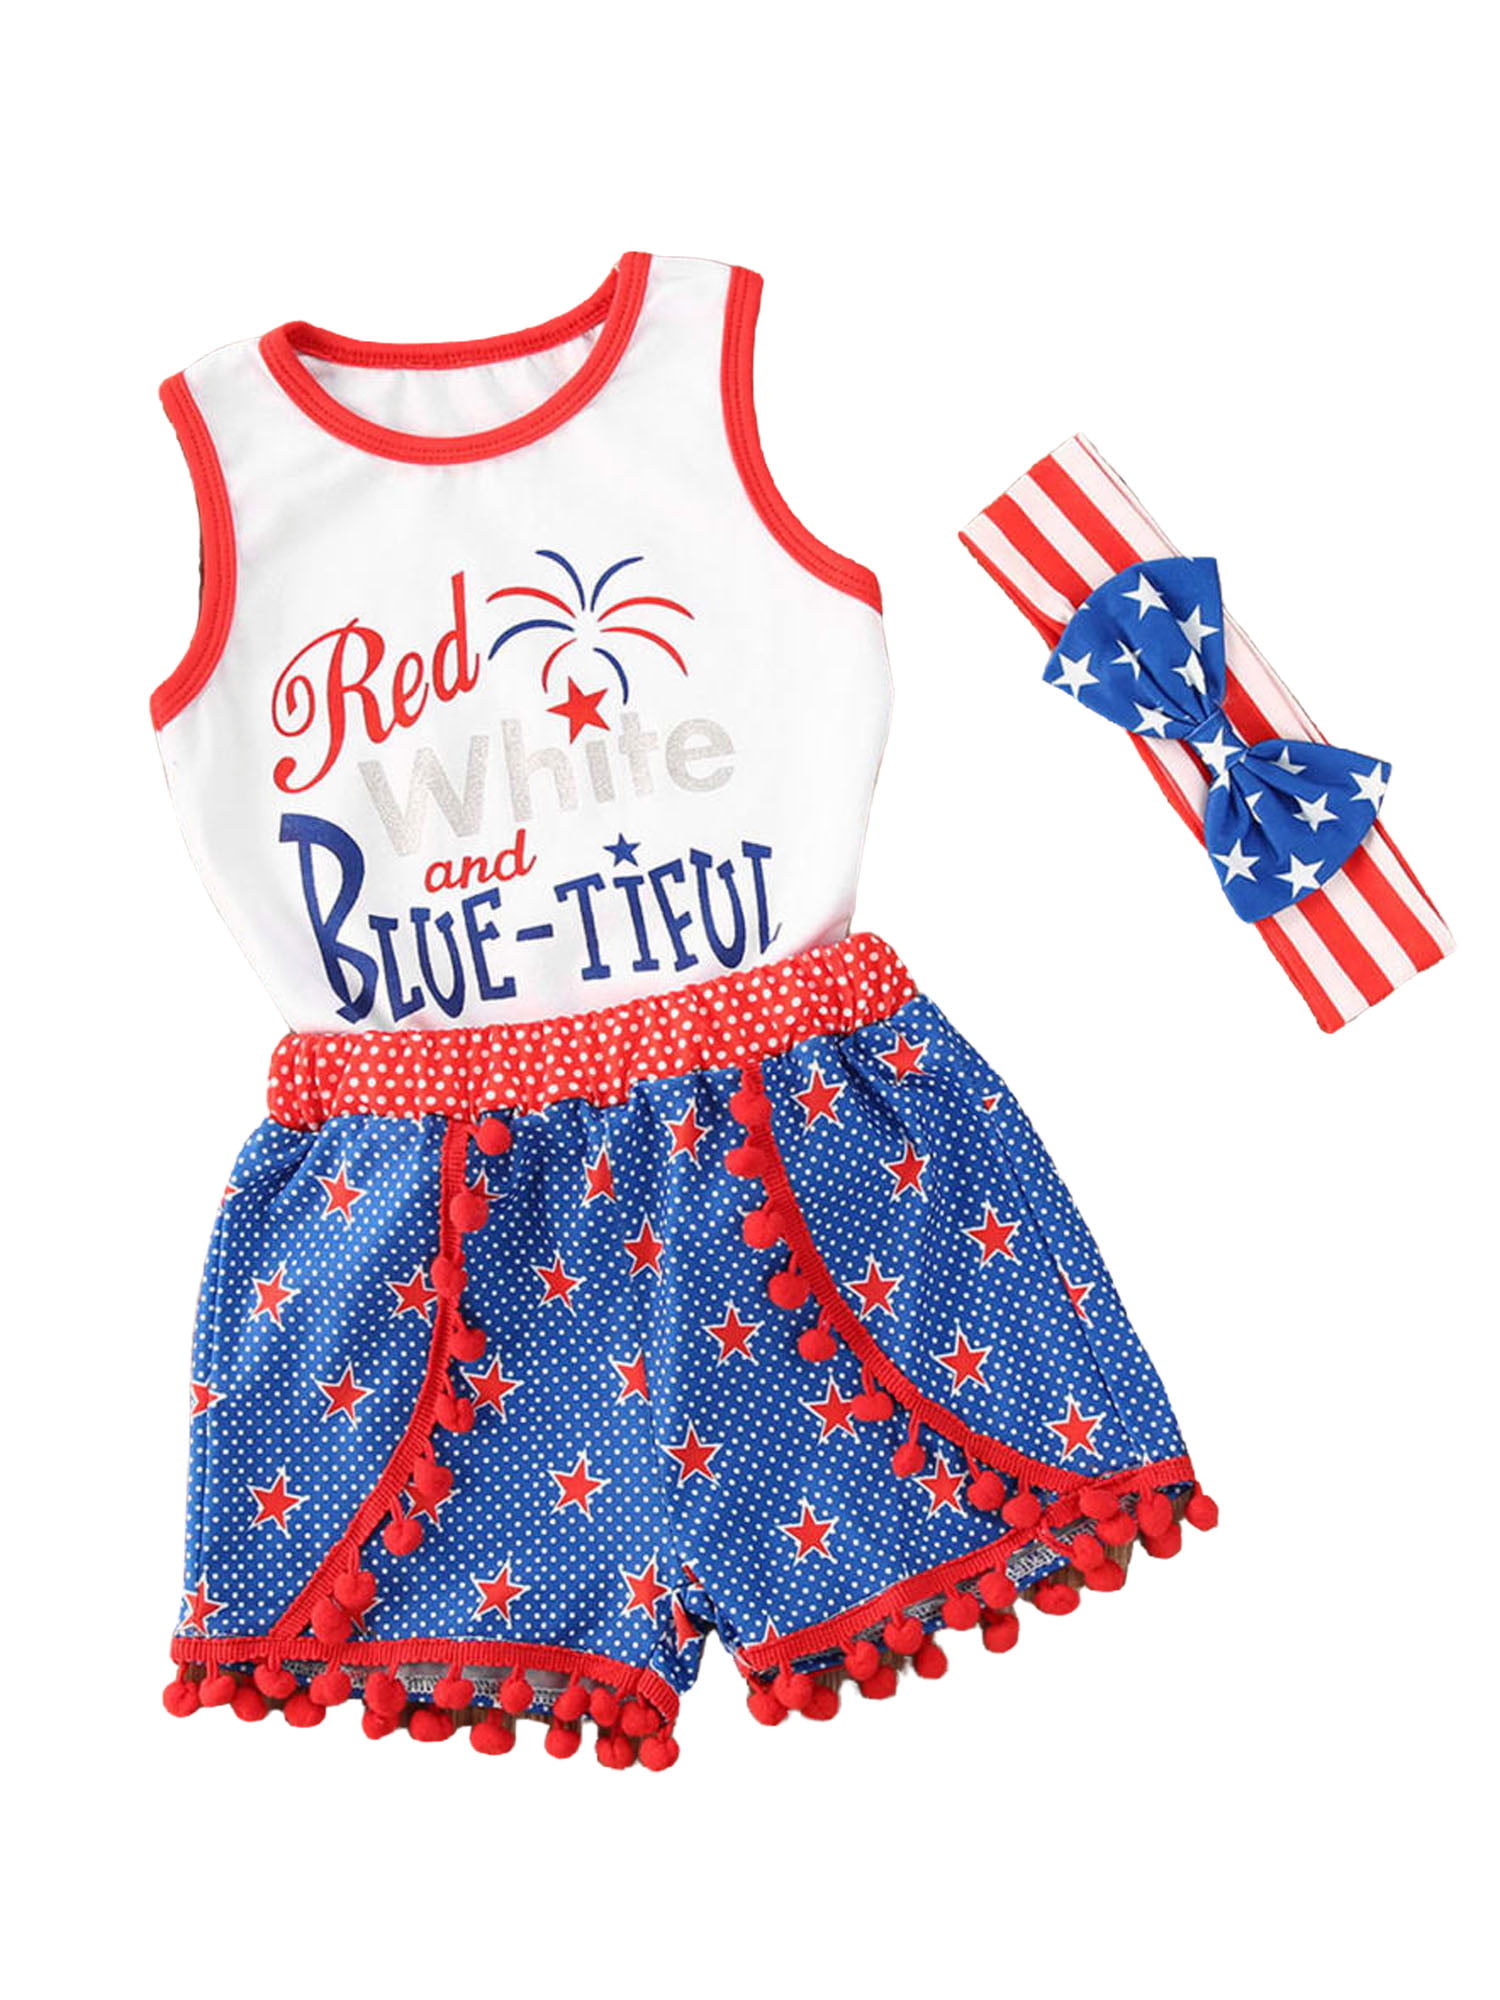 Tassel Shorts Pants with Hairband Infant Toddler Girl 4th of July Clothes Outfits Set Kids Sleeveless Shirt 